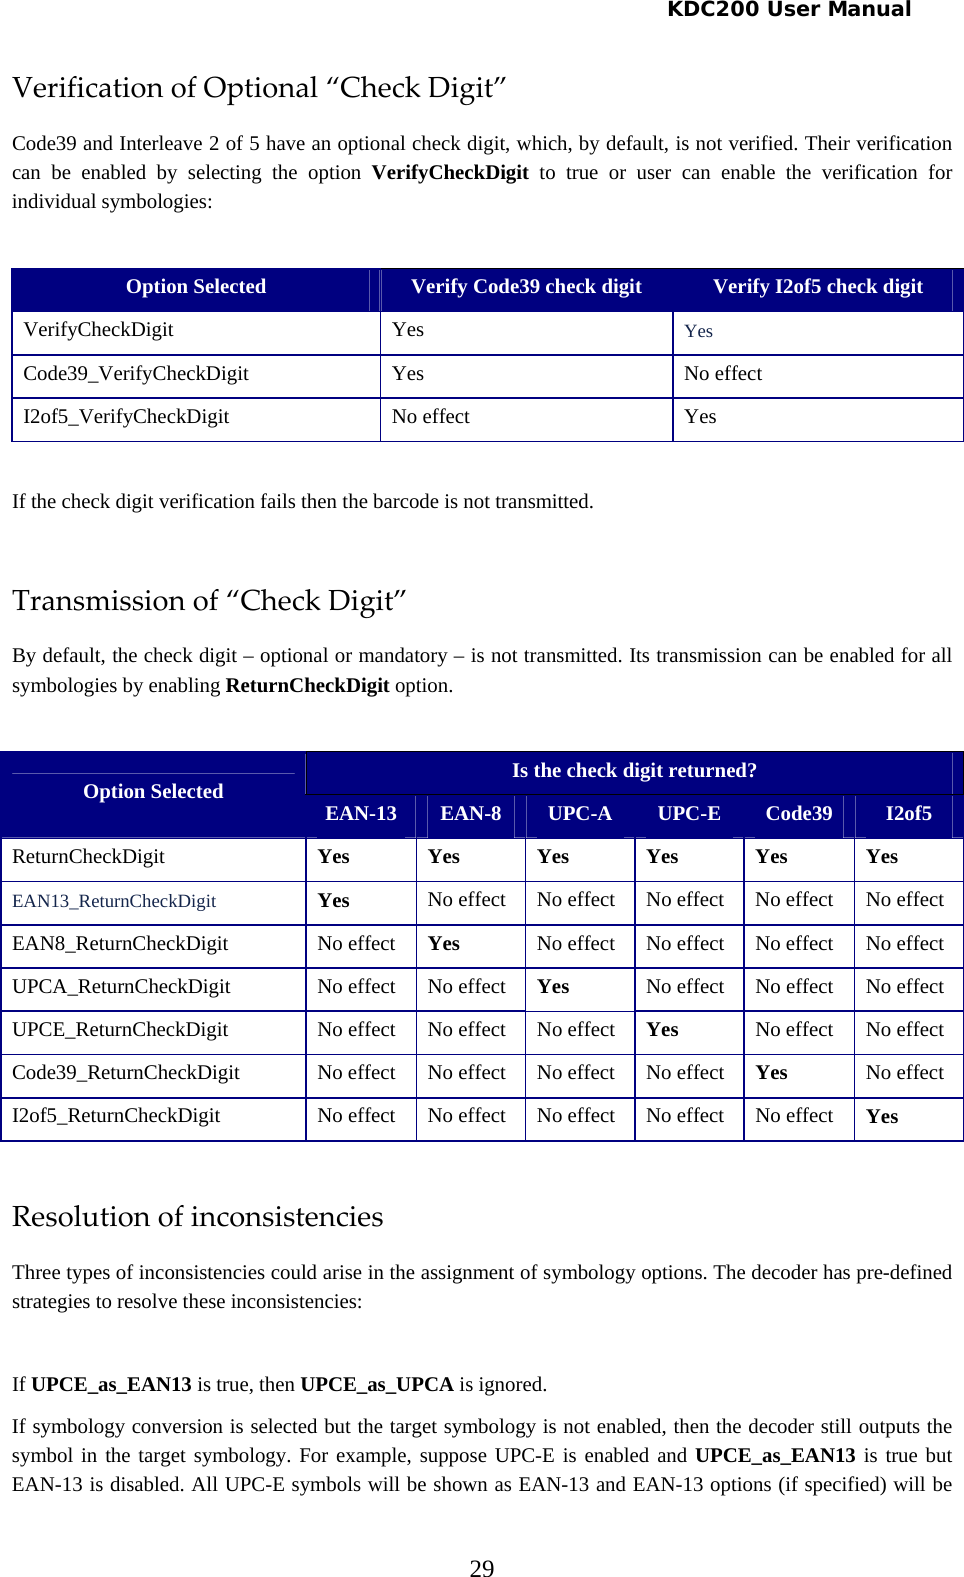   KDC200 User Manual 29 VerificationofOptional“CheckDigit”Code39 and Interleave 2 of 5 have an optional check digit, which, by default, is not verified. Their verification can be enabled by selecting the option VerifyCheckDigit to true or user can enable the verification for individual symbologies:  Option Selected  Verify Code39 check digit  Verify I2of5 check digit VerifyCheckDigit Yes  Yes Code39_VerifyCheckDigit Yes  No effect I2of5_VerifyCheckDigit No effect  Yes  If the check digit verification fails then the barcode is not transmitted.   Transmissionof“CheckDigit”By default, the check digit – optional or mandatory – is not transmitted. Its transmission can be enabled for all symbologies by enabling ReturnCheckDigit option.   Is the check digit returned? Option Selected  EAN-13 EAN-8  UPC-A  UPC-E  Code39  I2of5 ReturnCheckDigit  Yes Yes Yes Yes Yes Yes EAN13_ReturnCheckDigit  Yes  No effect  No effect  No effect  No effect  No effect EAN8_ReturnCheckDigit No effect Yes  No effect  No effect  No effect  No effect UPCA_ReturnCheckDigit No effect  No effect  Yes No effect  No effect No effect UPCE_ReturnCheckDigit No effect  No effect  No effect  Yes No effect  No effect Code39_ReturnCheckDigit No effect No effect  No effect No effect Yes No effect I2of5_ReturnCheckDigit No effect  No effect  No effect  No effect  No effect  Yes  ResolutionofinconsistenciesThree types of inconsistencies could arise in the assignment of symbology options. The decoder has pre-defined strategies to resolve these inconsistencies:  If UPCE_as_EAN13 is true, then UPCE_as_UPCA is ignored. If symbology conversion is selected but the target symbology is not enabled, then the decoder still outputs the symbol in the target symbology. For example, suppose UPC-E is enabled and UPCE_as_EAN13 is true but EAN-13 is disabled. All UPC-E symbols will be shown as EAN-13 and EAN-13 options (if specified) will be 